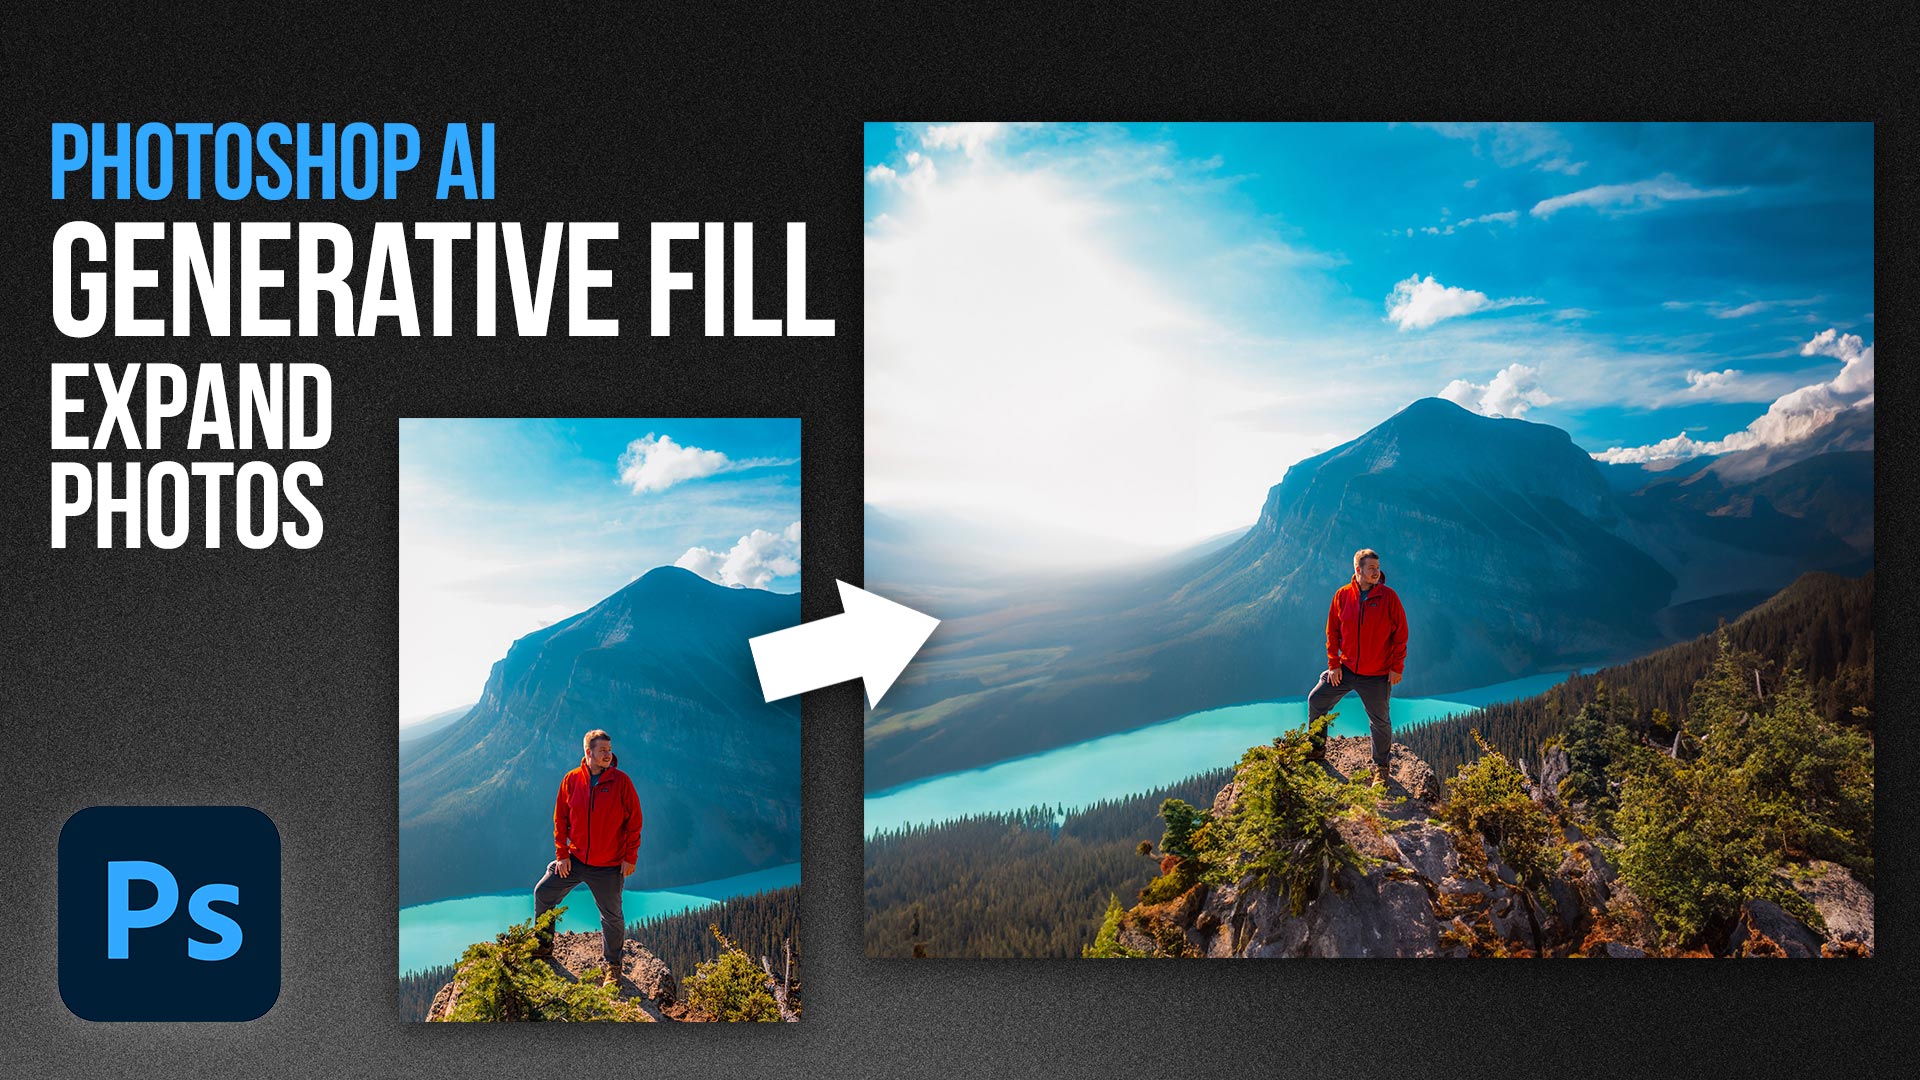 How to Extend Images with Photoshop Generative Fill (Easy Guide)